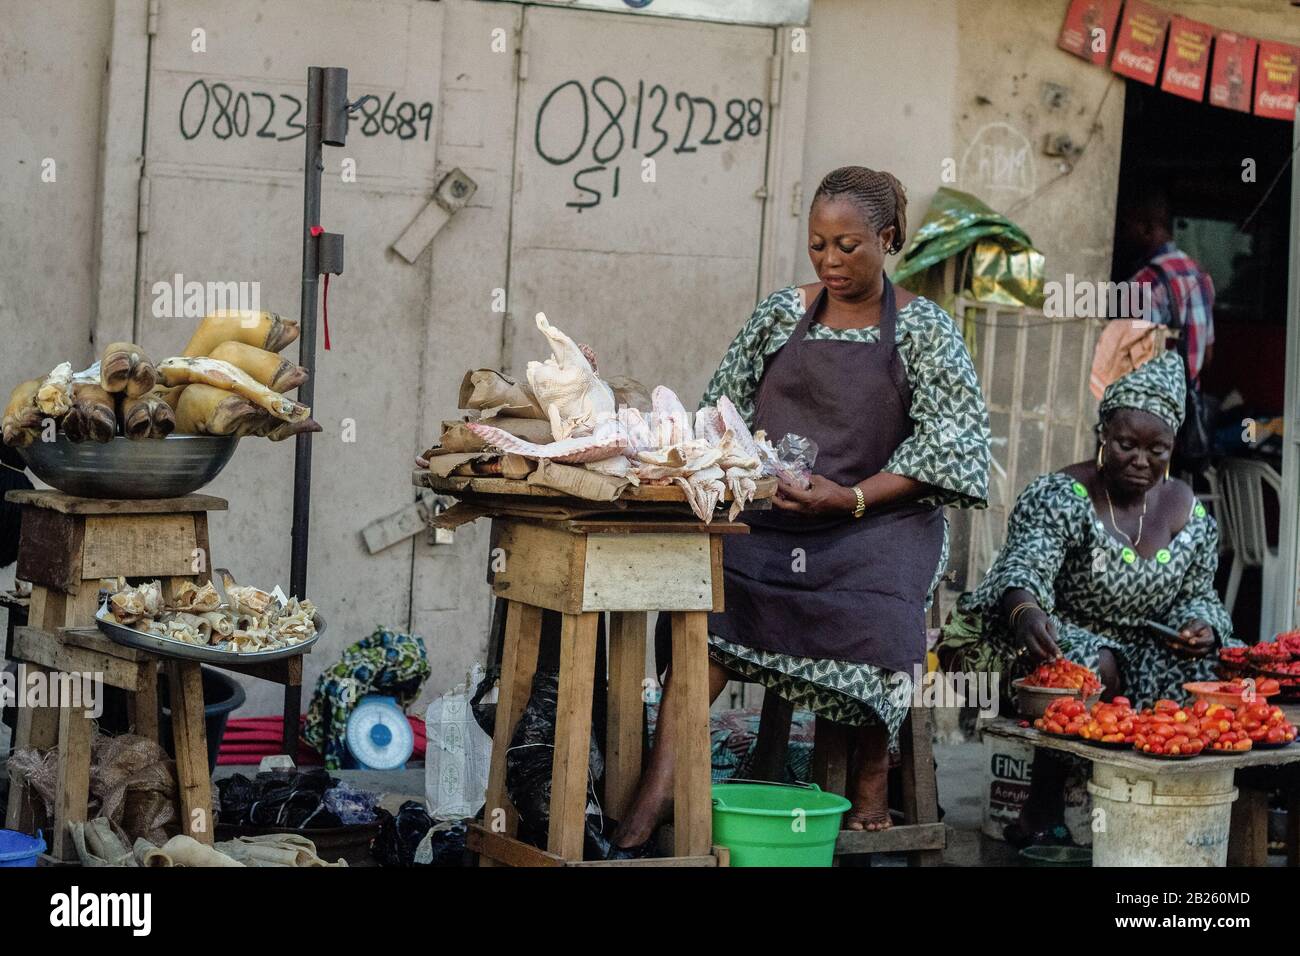 Two women displays their goods at a roadside market on a street in Lagos, Nigeria. Stock Photo